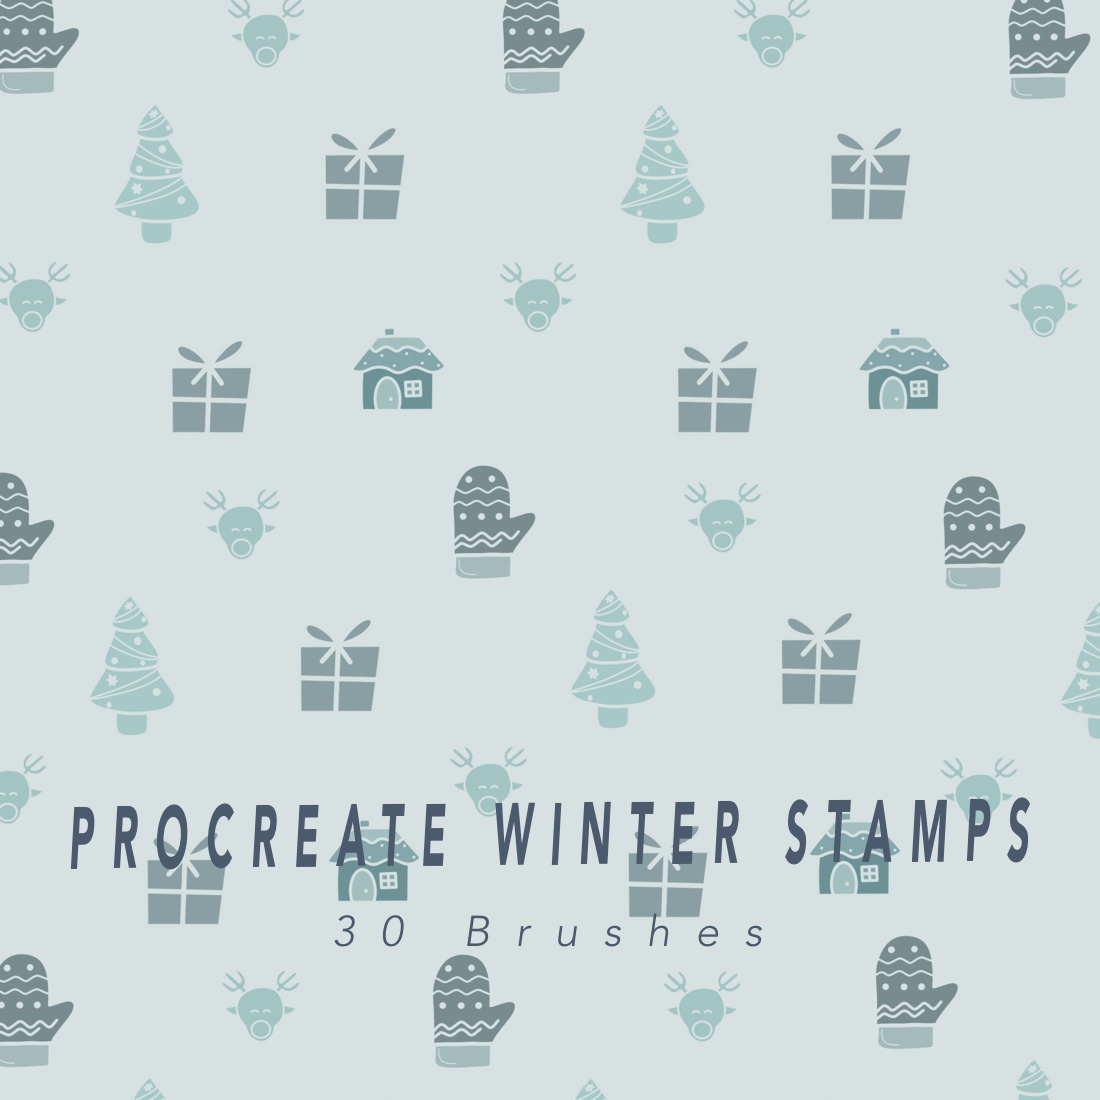 Procreate Winter Stamps Brushes cover image.